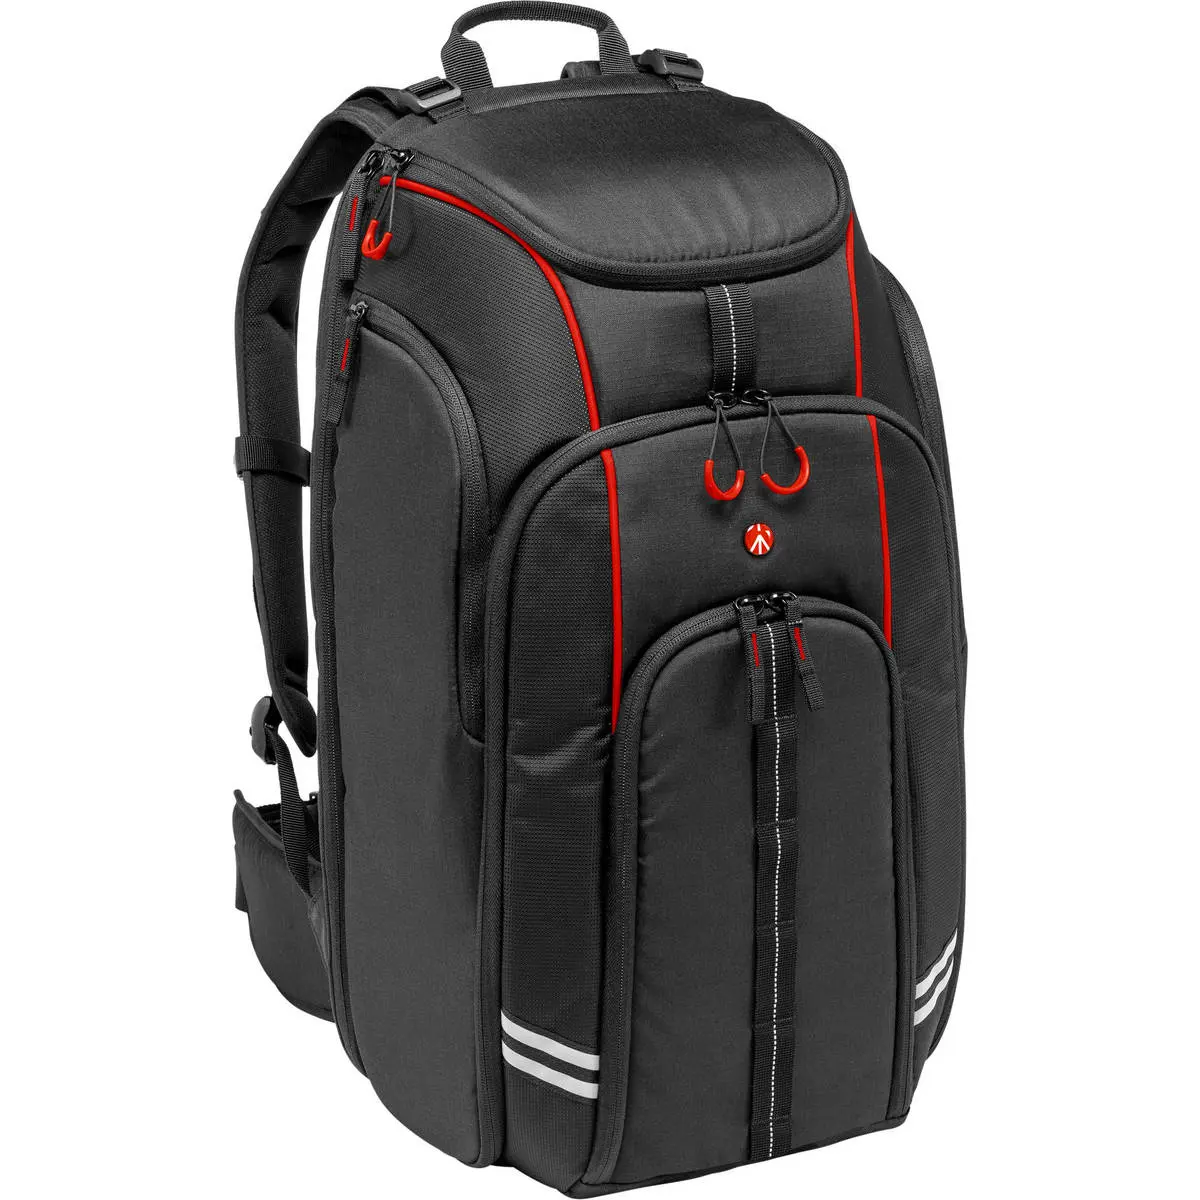 Manfrotto D1 Drone Backpack for DJI (MB BP-D1) Drone